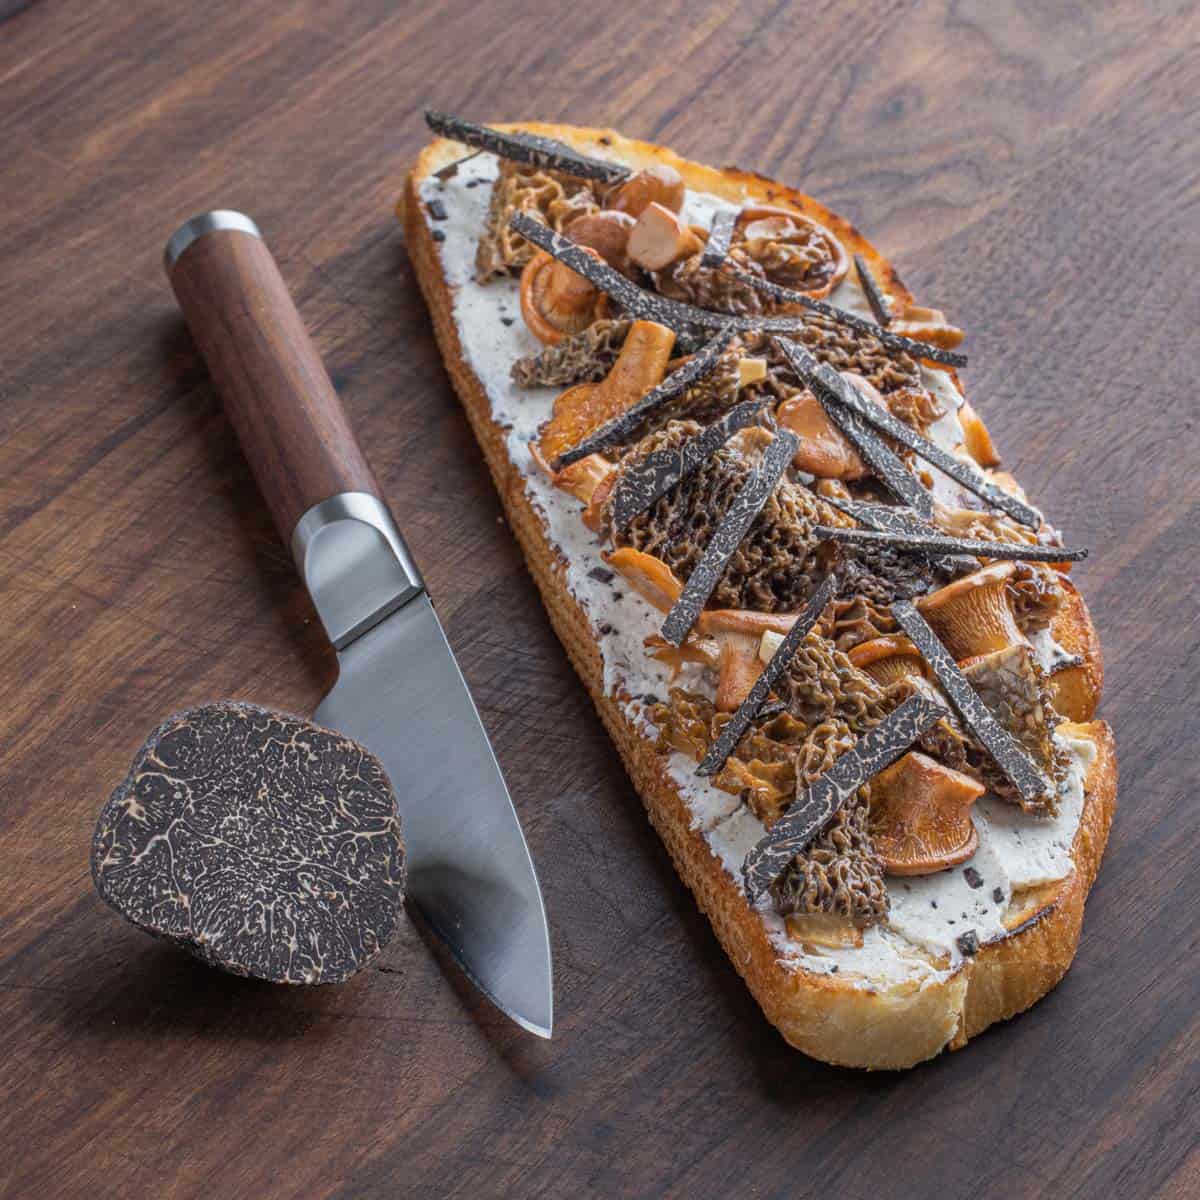 Sauteed mushrooms on toast with truffles with a knife and whole truffle.